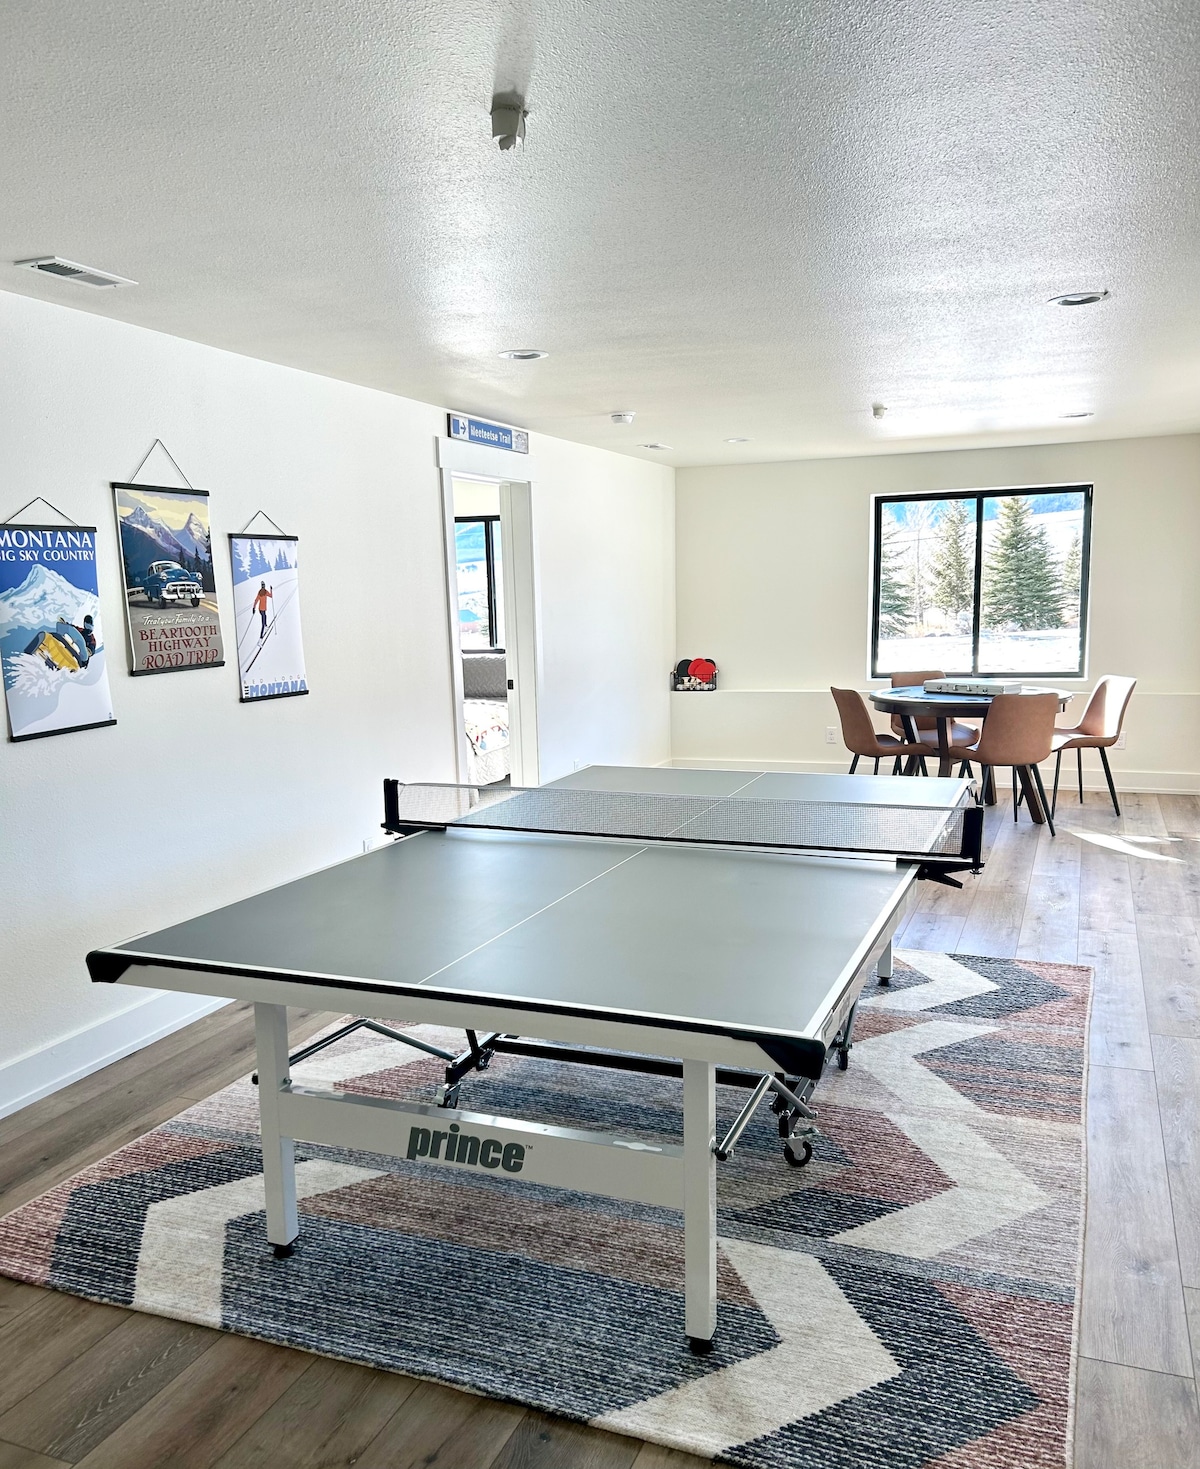 NEW 5BR/6B (4 King En-Suites) Game Rm + Workout Rm